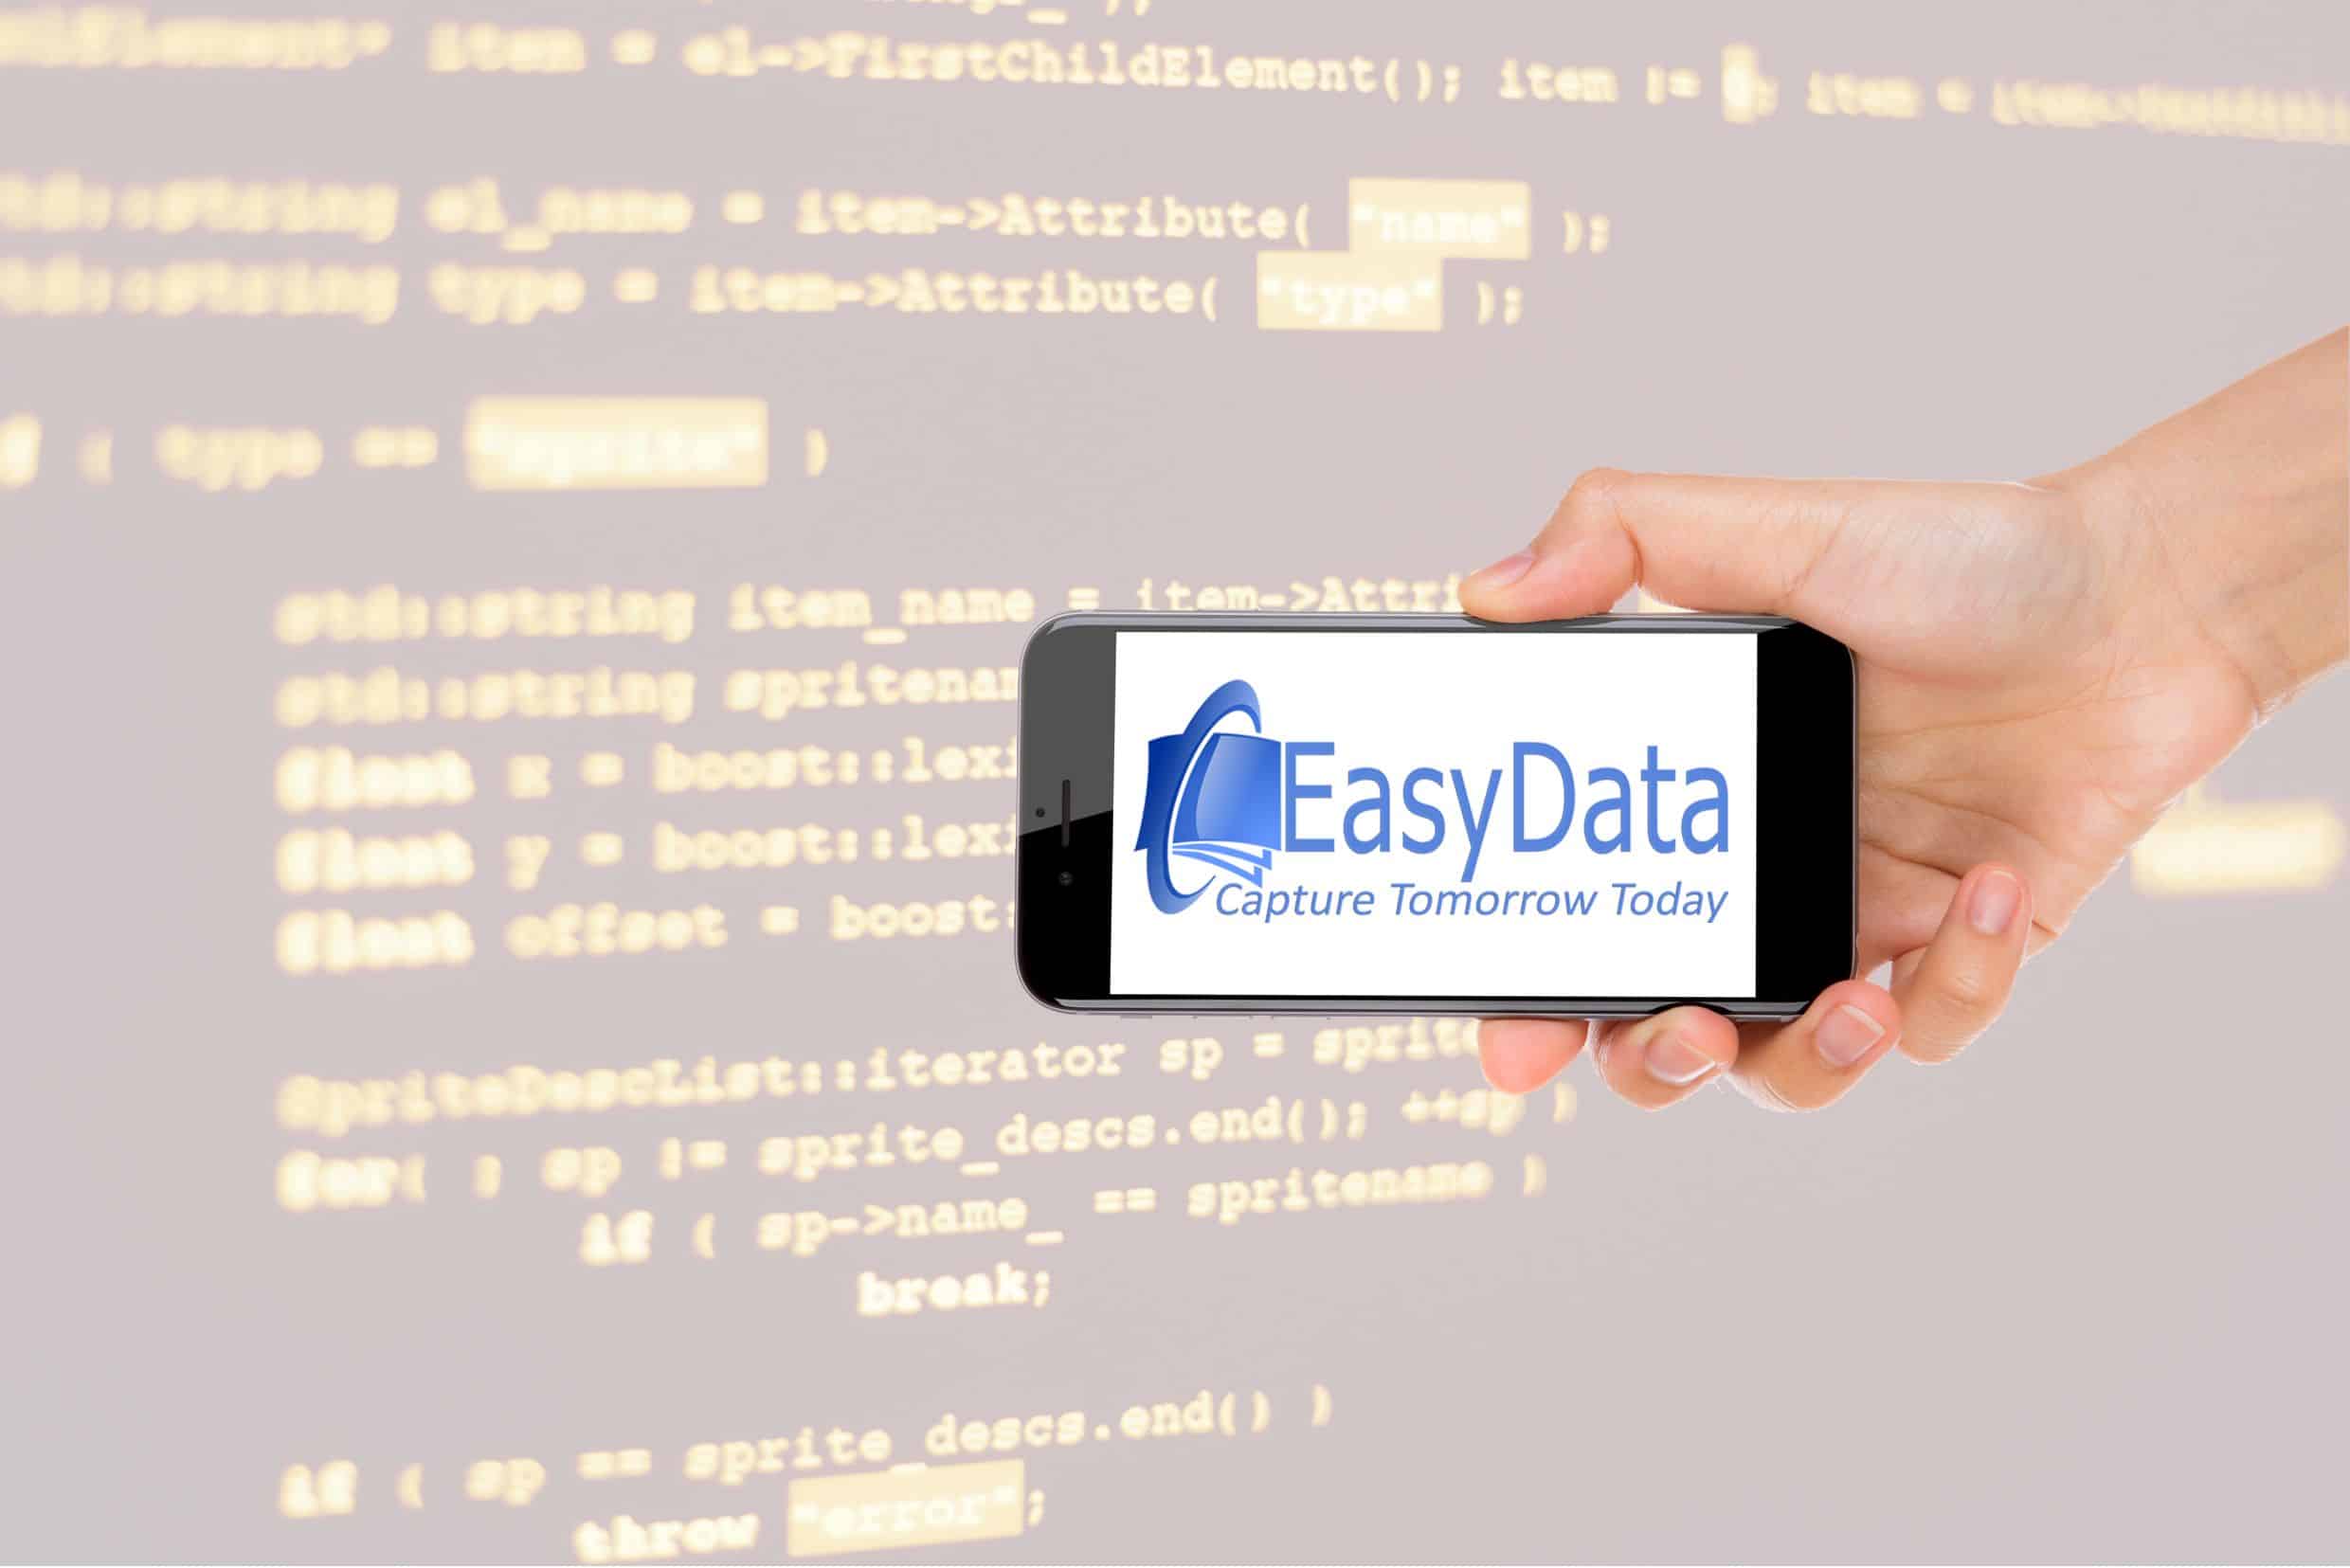 Application integration is the expertise of EasyData